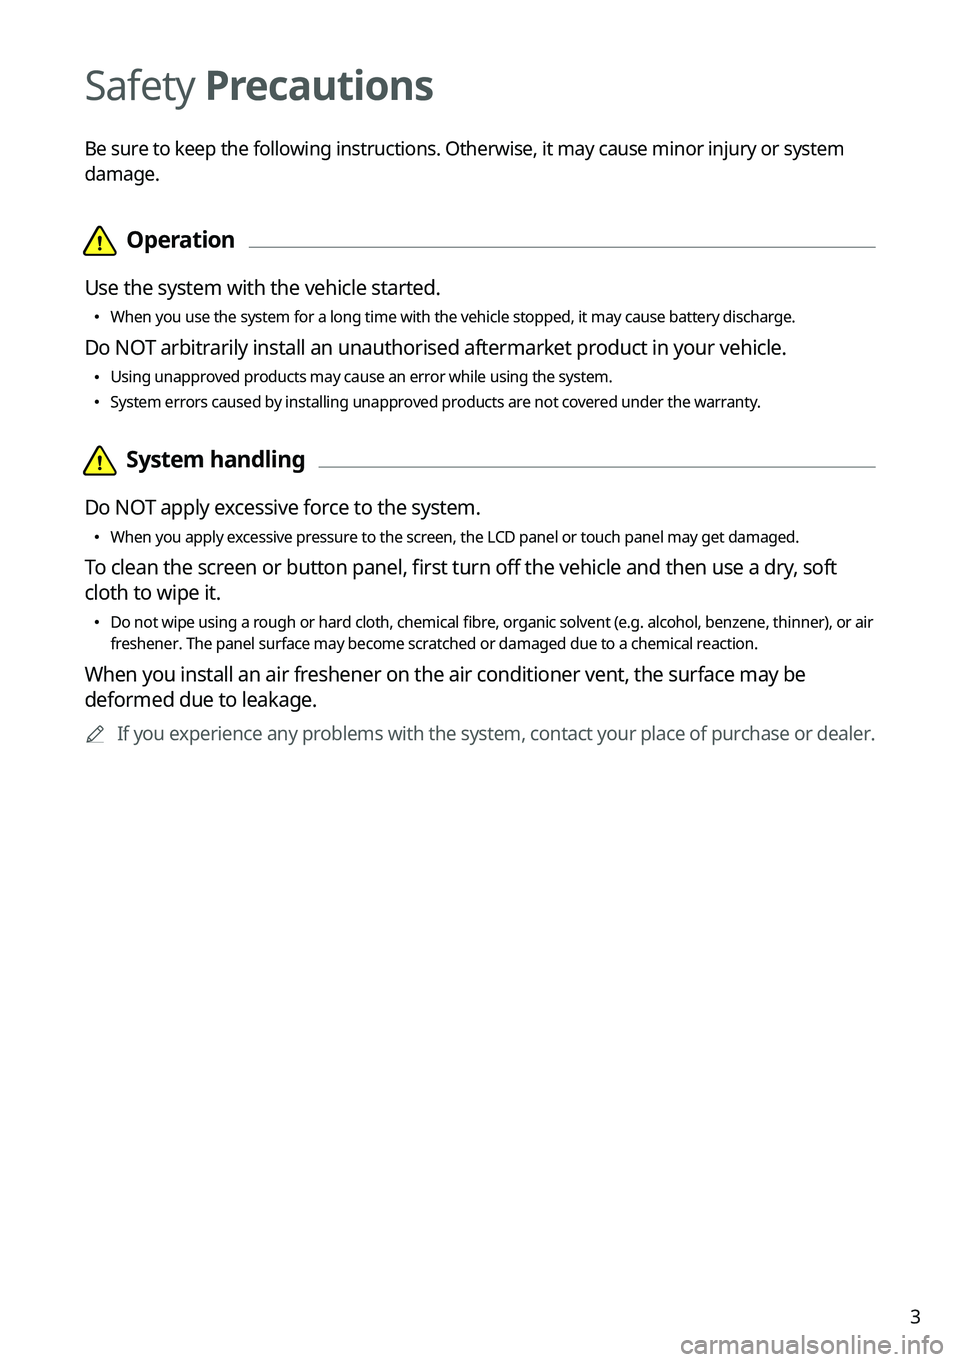 KIA SORENTO 2023  Navigation System Quick Reference Guide 3
Safety Precautions
Be sure to keep the following instructions. Otherwise, it may cause minor injury or system 
damage. 
  